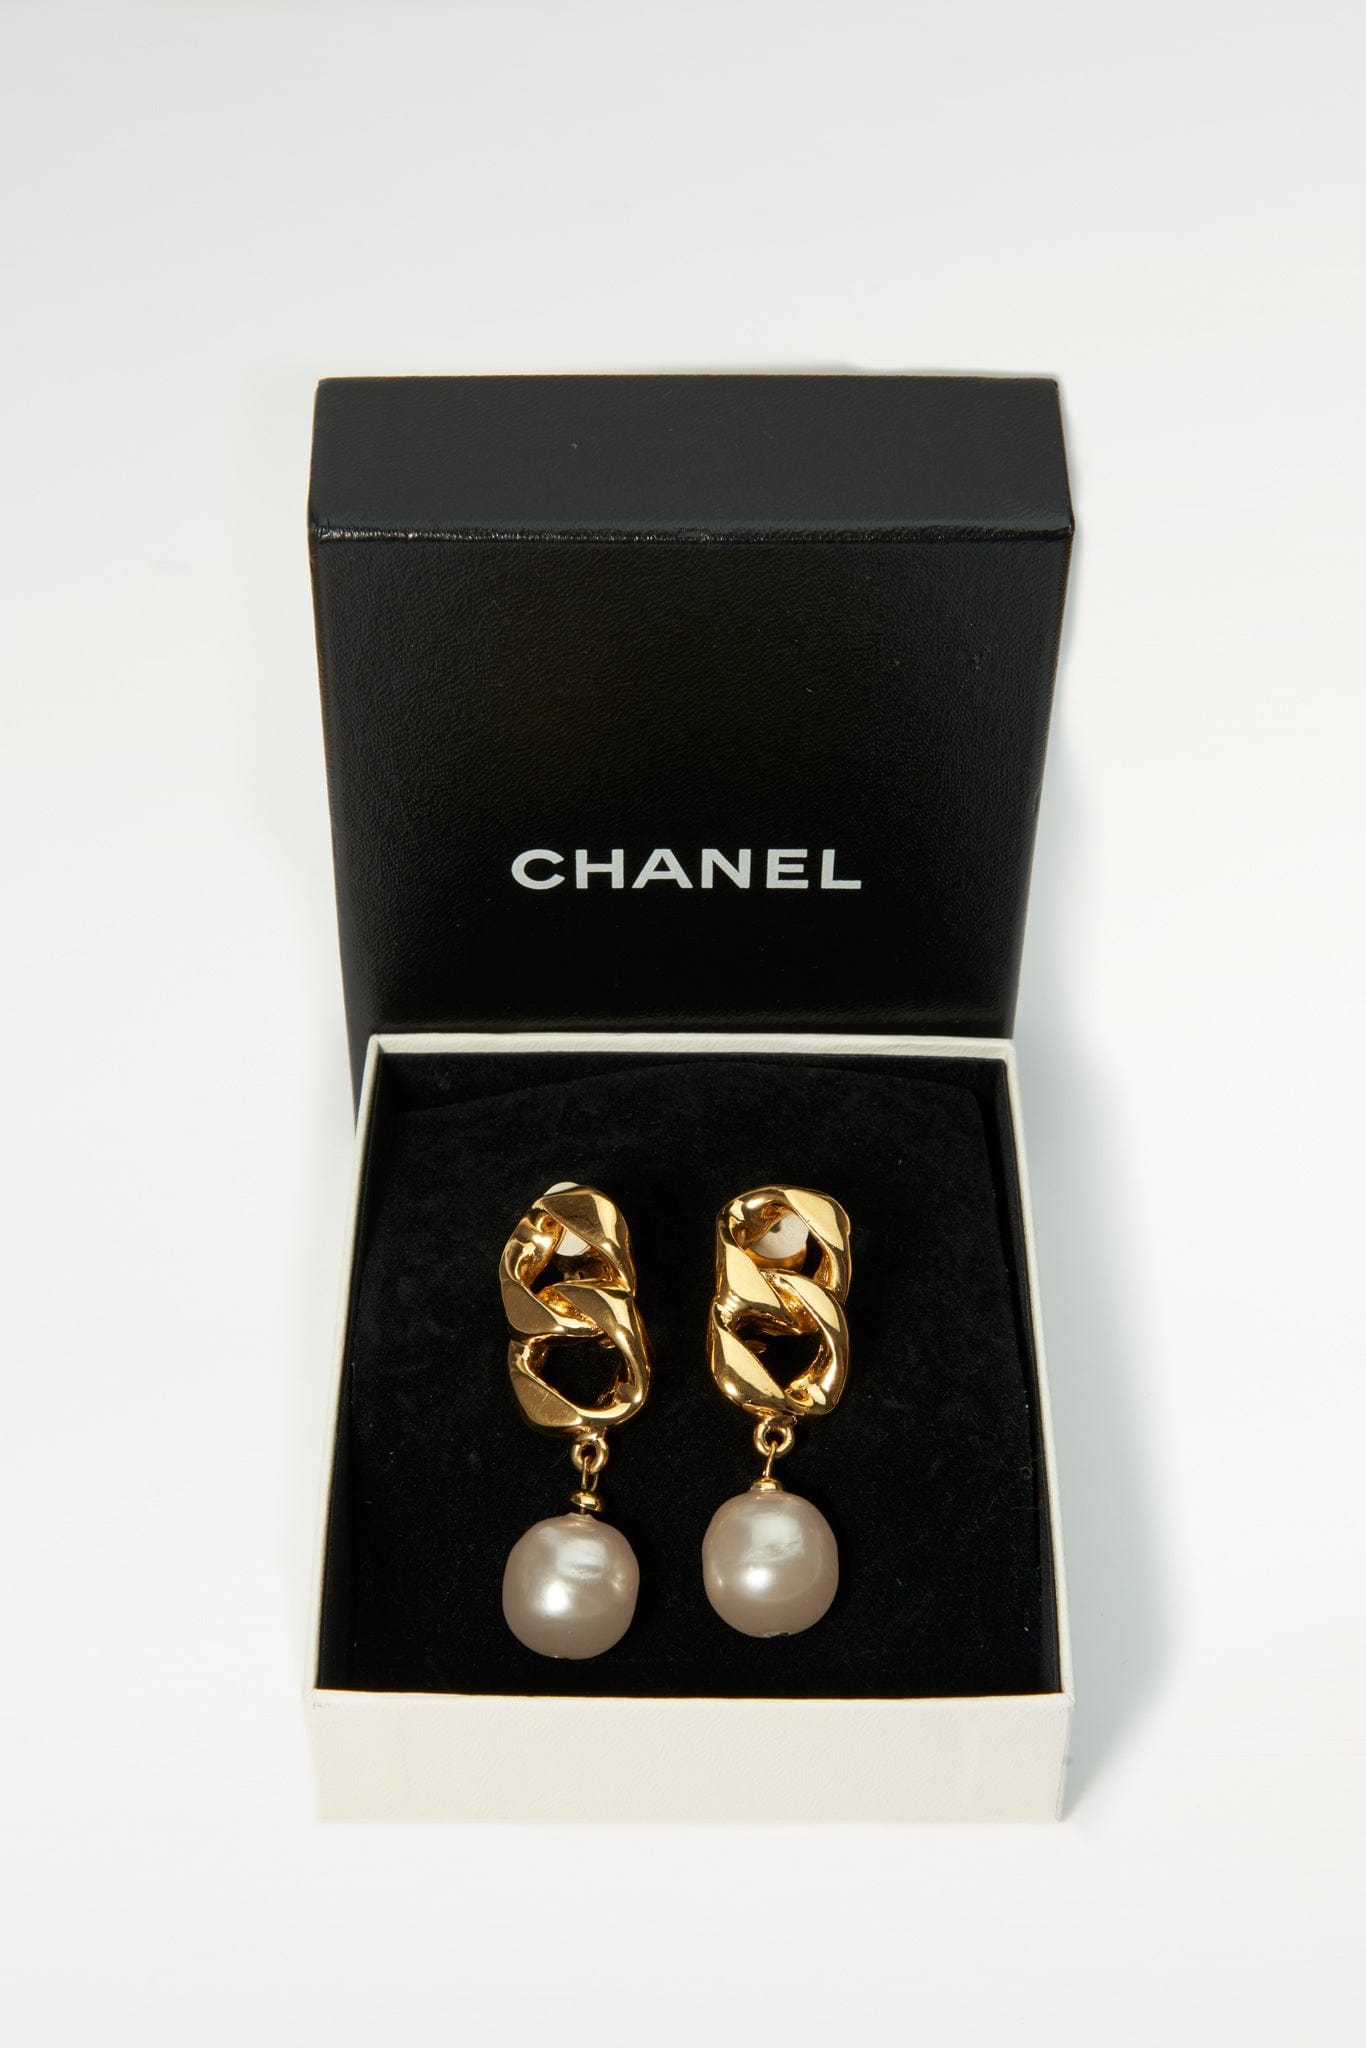 Vintage Chanel Chain and Faux Pearl Earrings – The Hosta